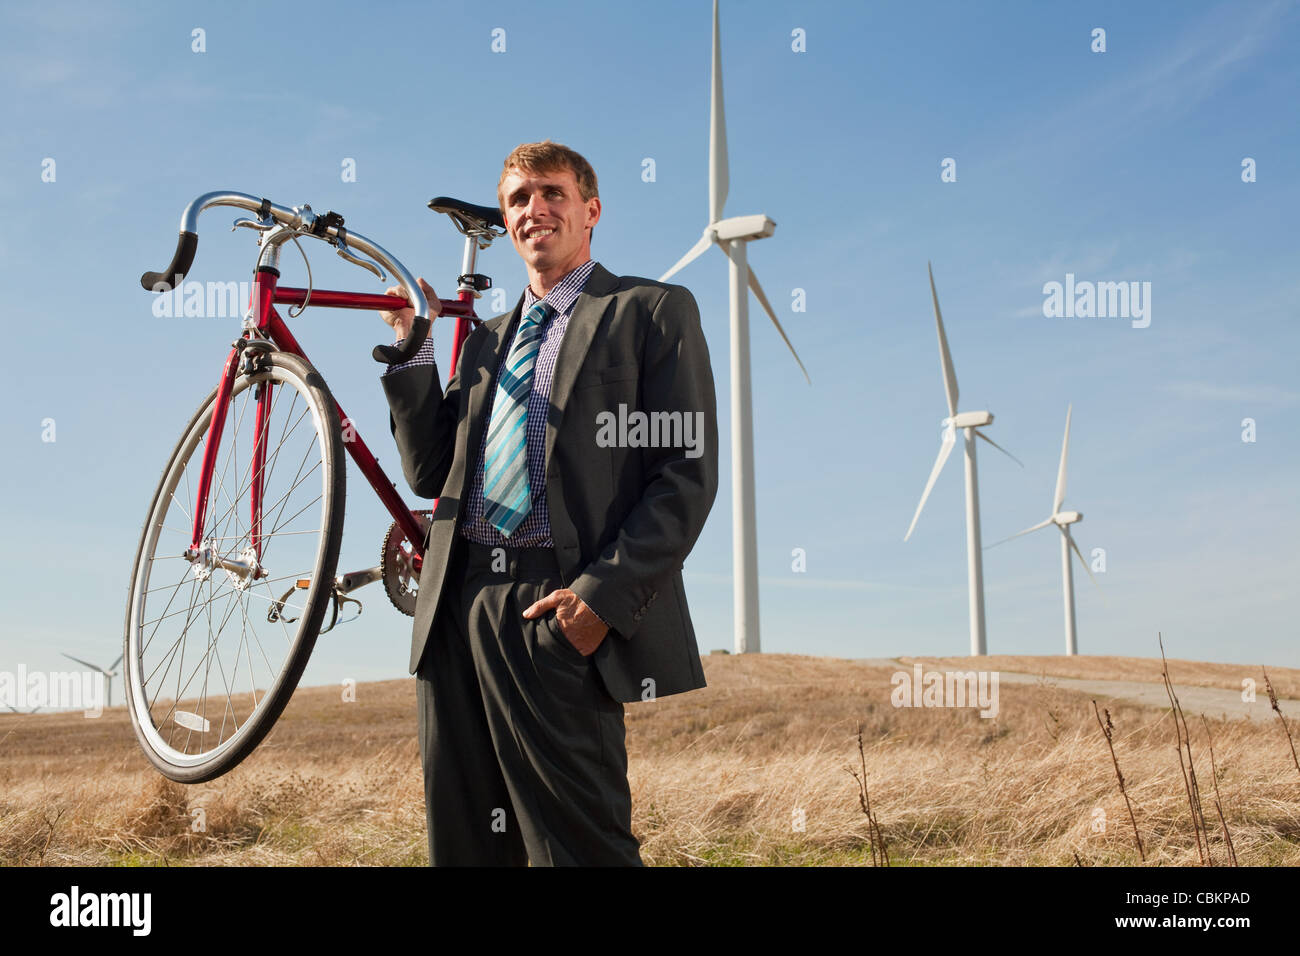 Man holding bicycle in front of wind turbines Stock Photo